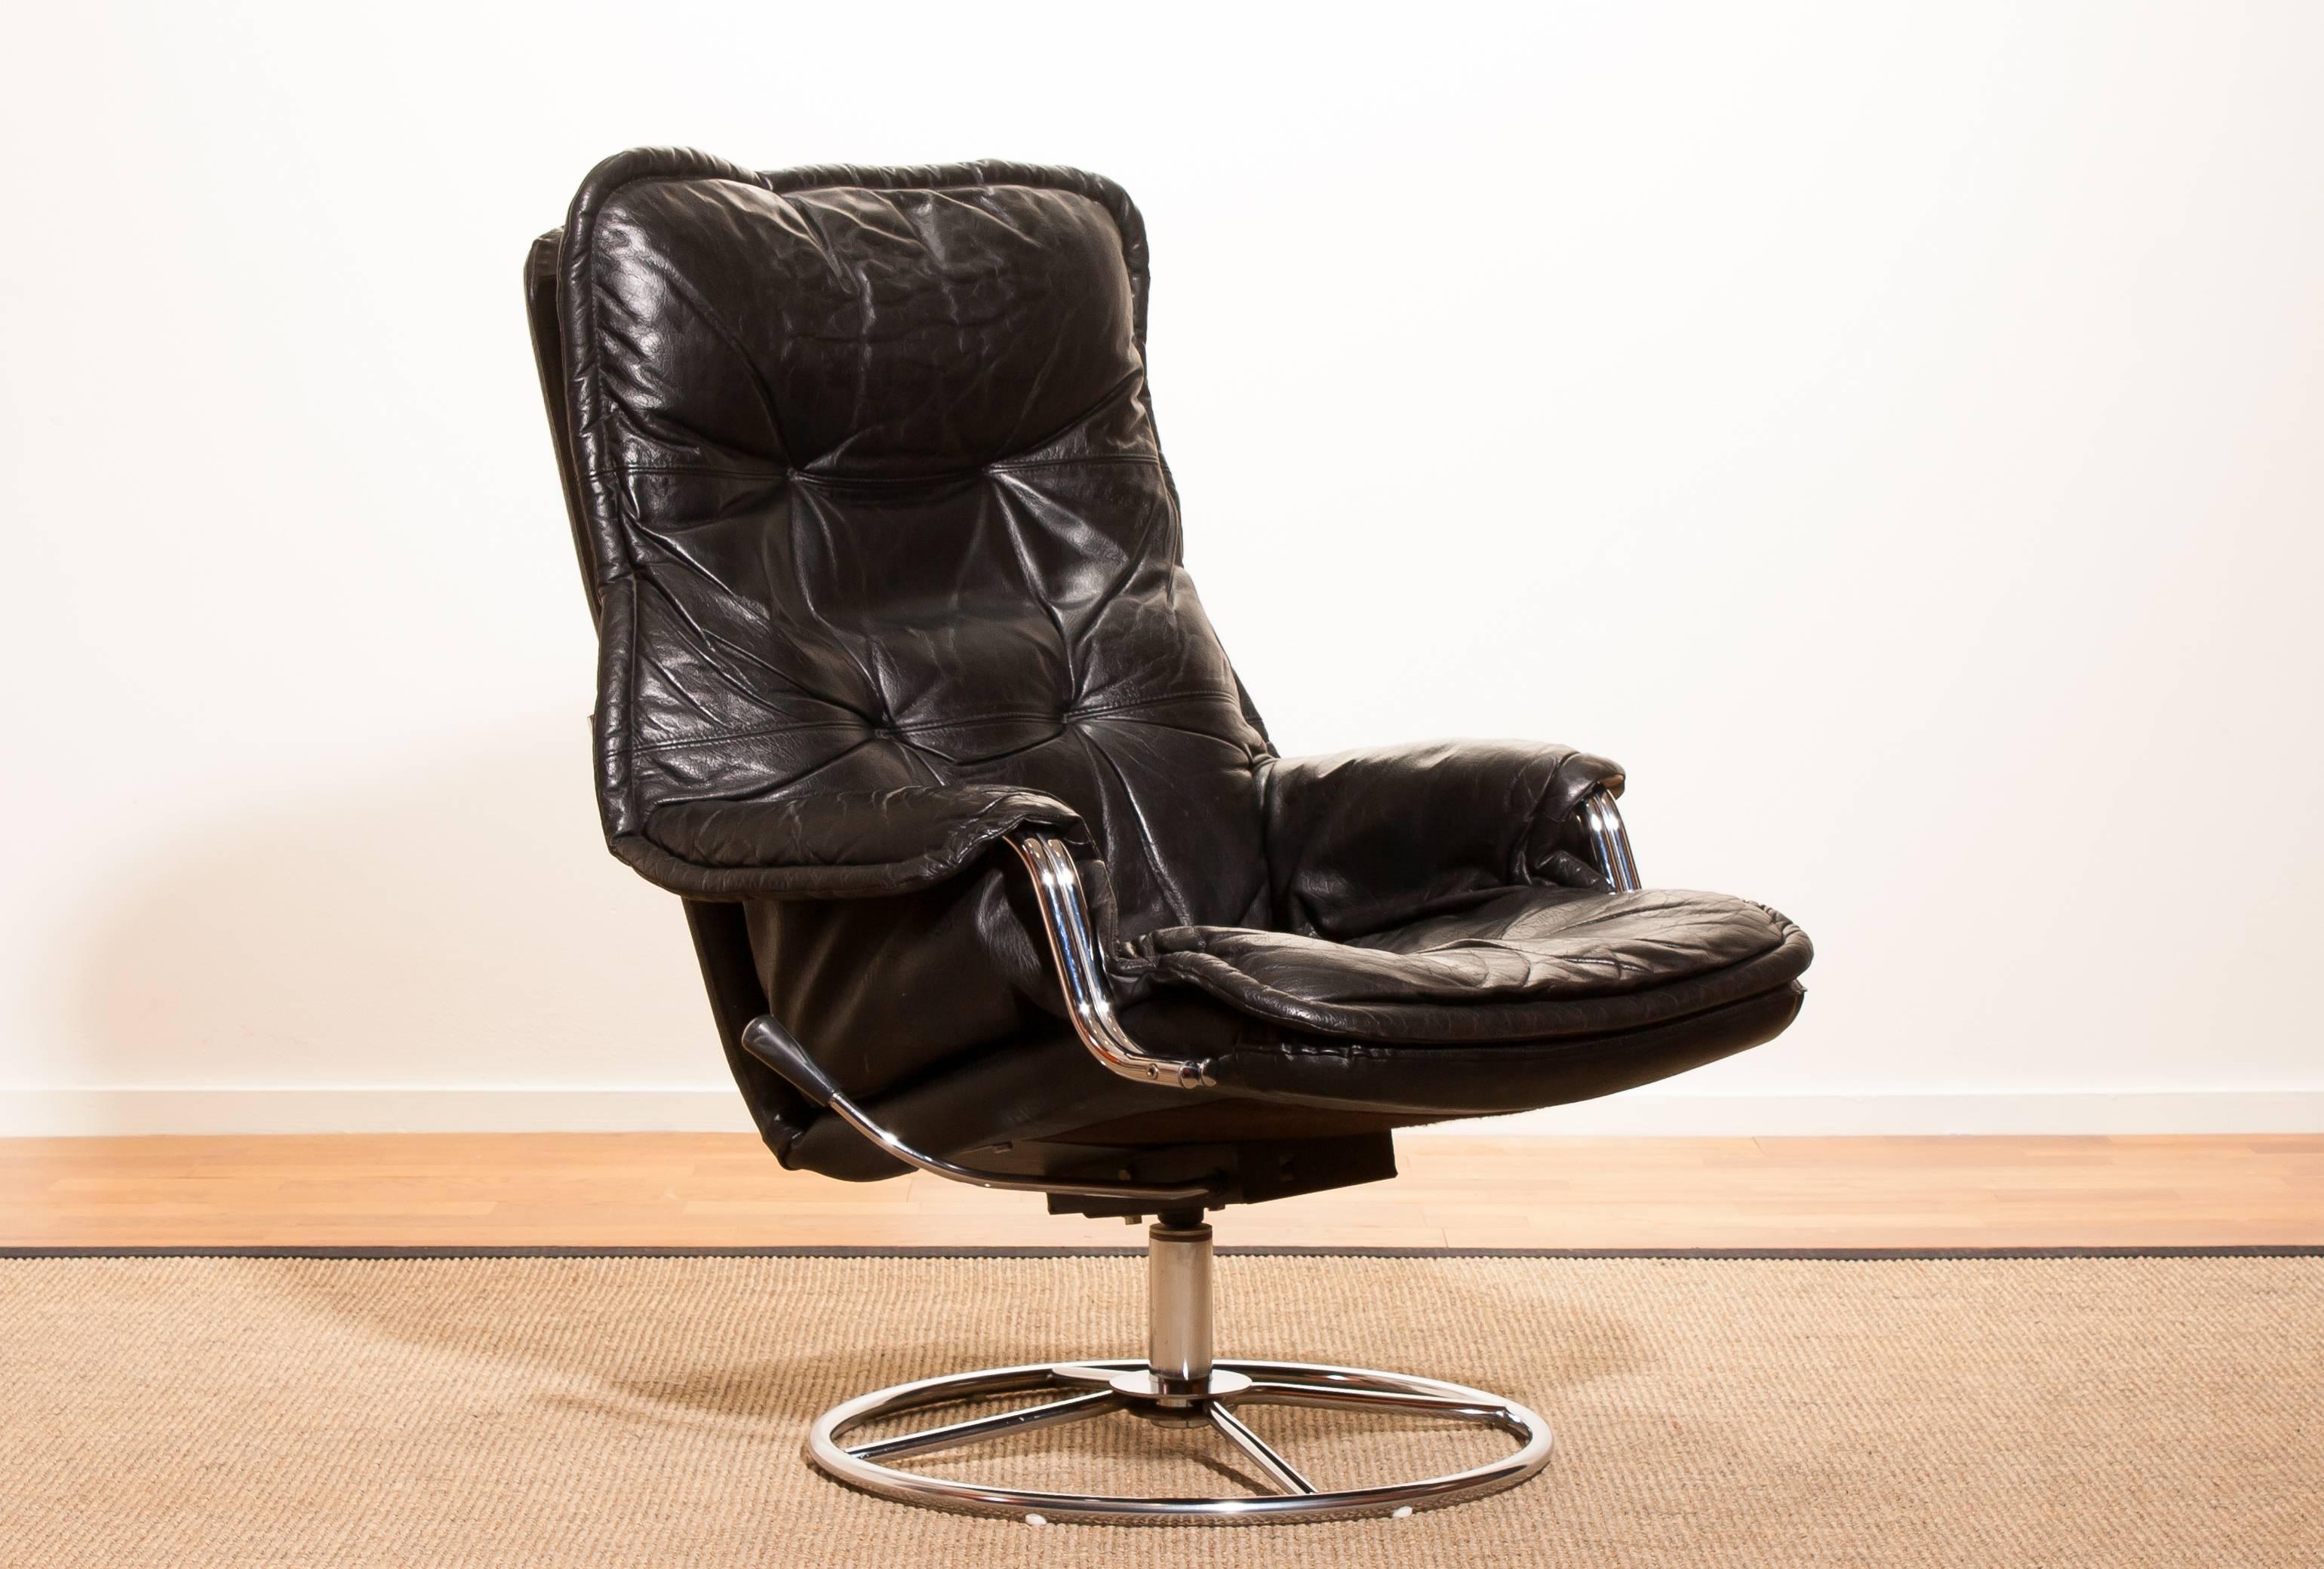 Beautiful lounge chair made in Sweden.
This very nice design chair has a black leather seating and armrests on a swivel chrome steel frame.
It is in a wonderful condition.
Period 1970s
Dimensions: H 94 cm, W 68 cm, D 72 cm, Sh 40.